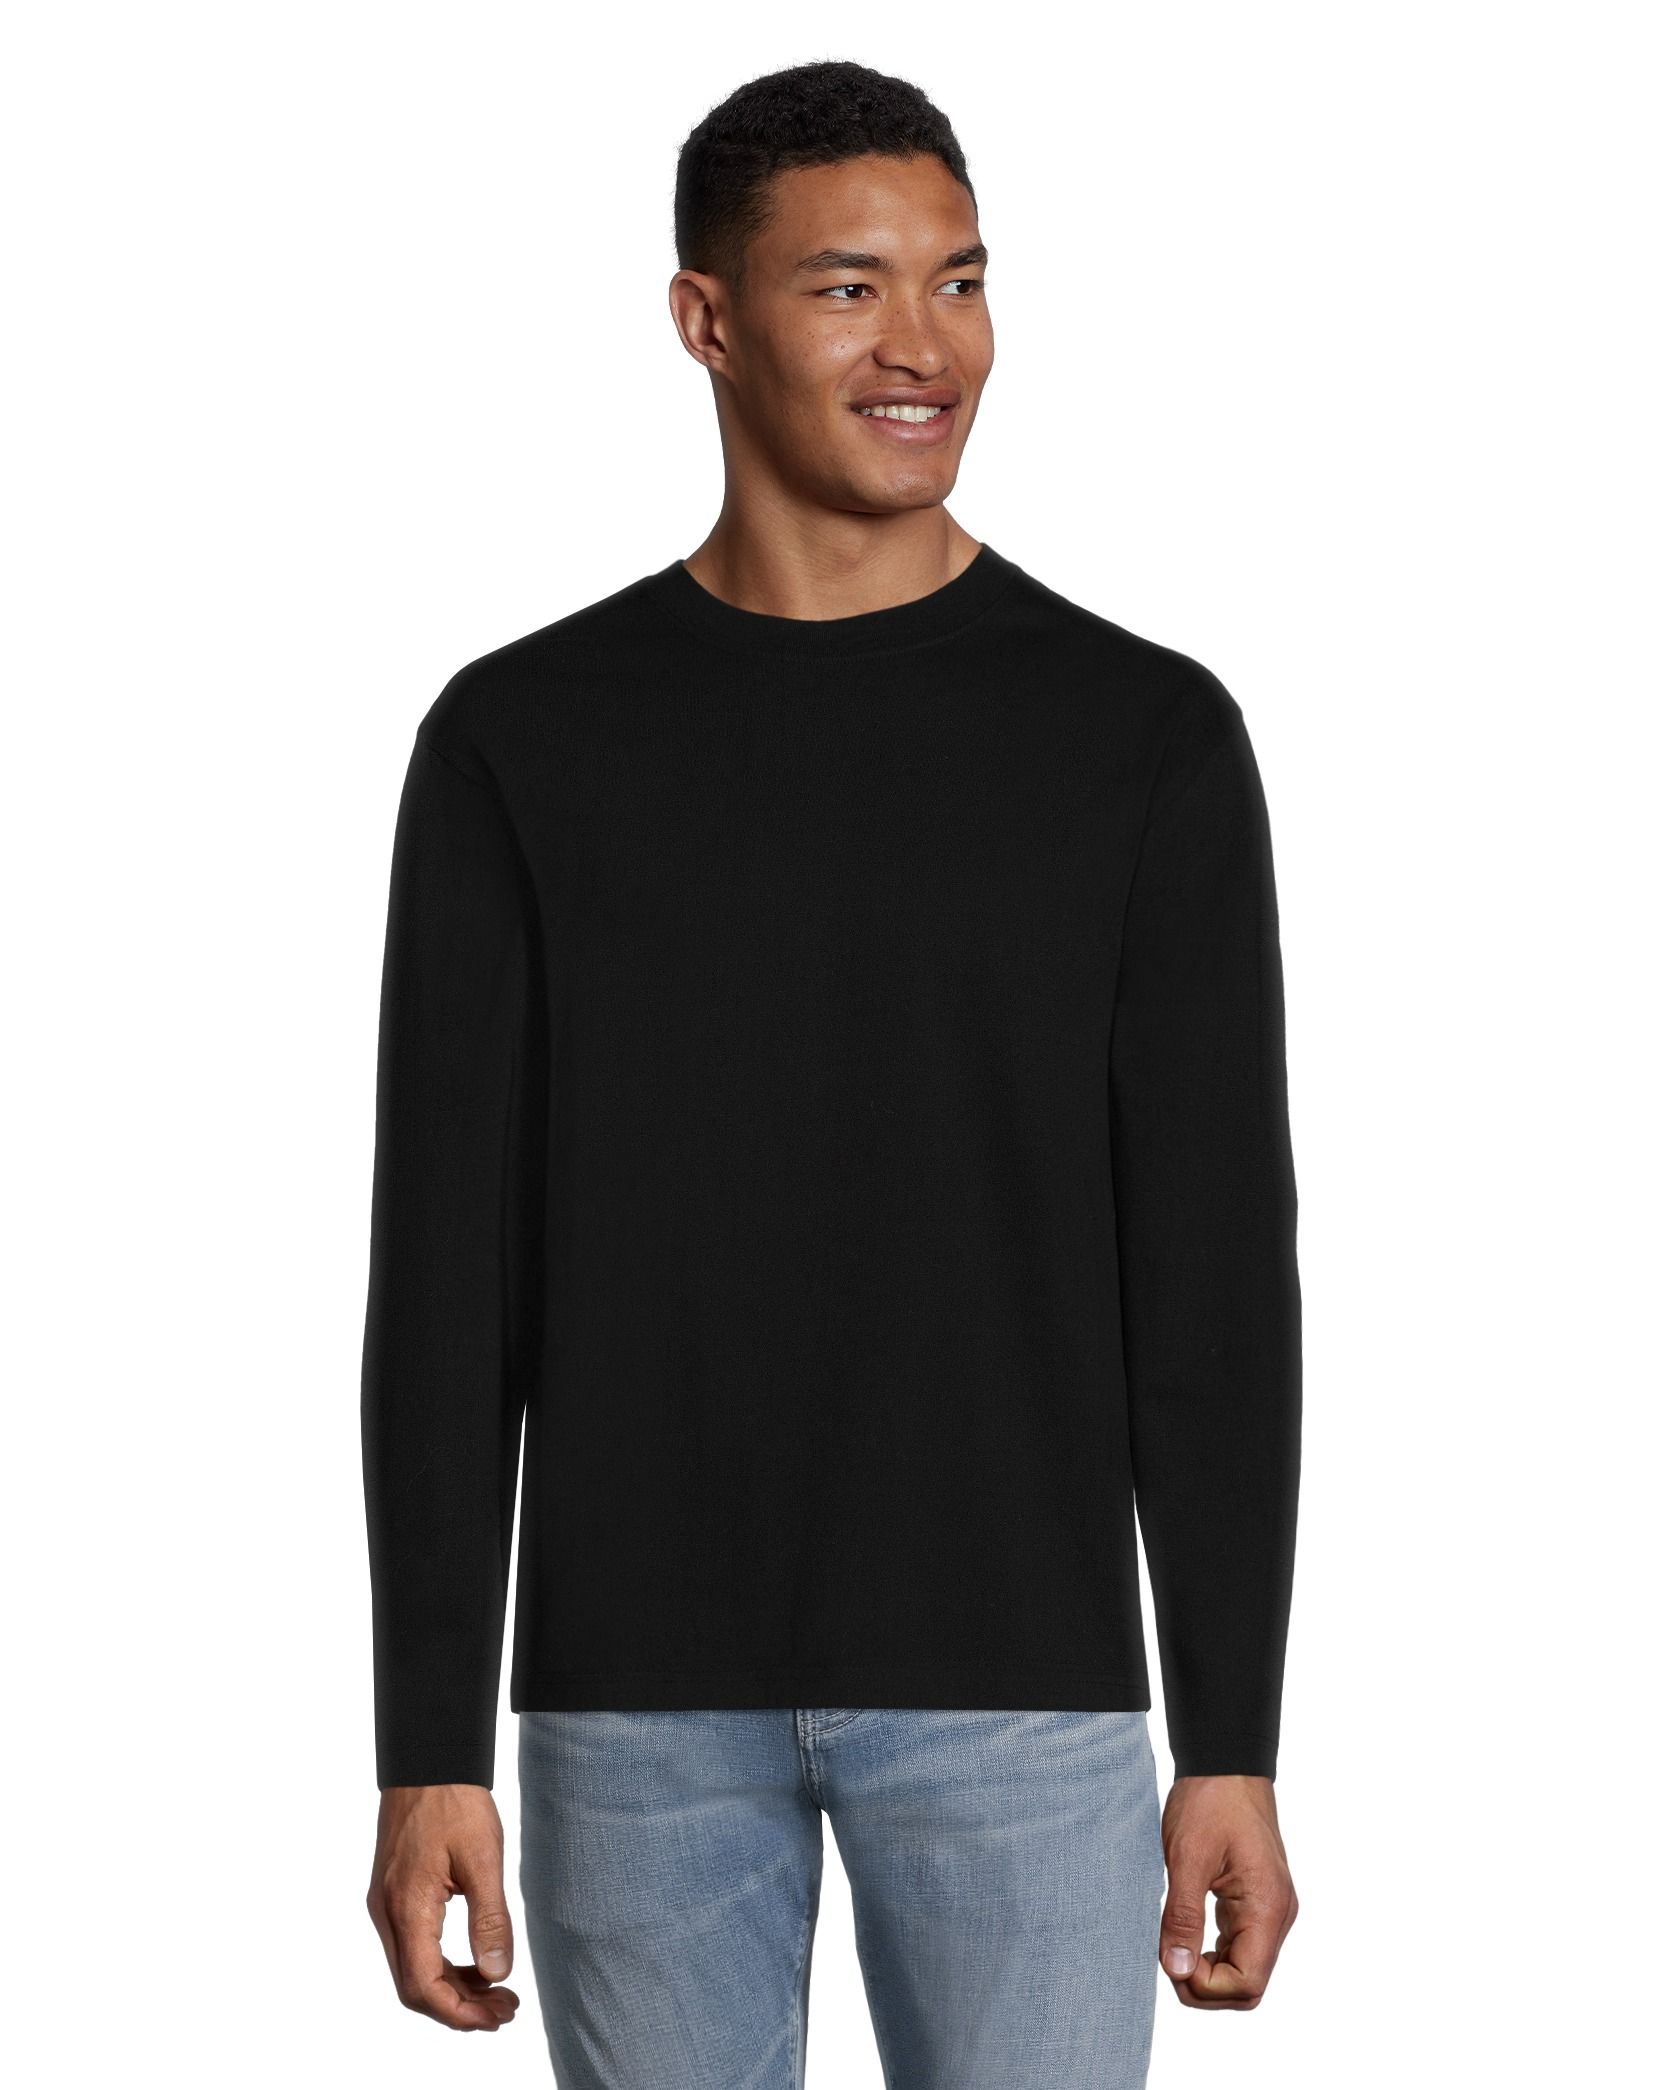 Crew Neck Long Sleeve Layering Top - Shop Now!